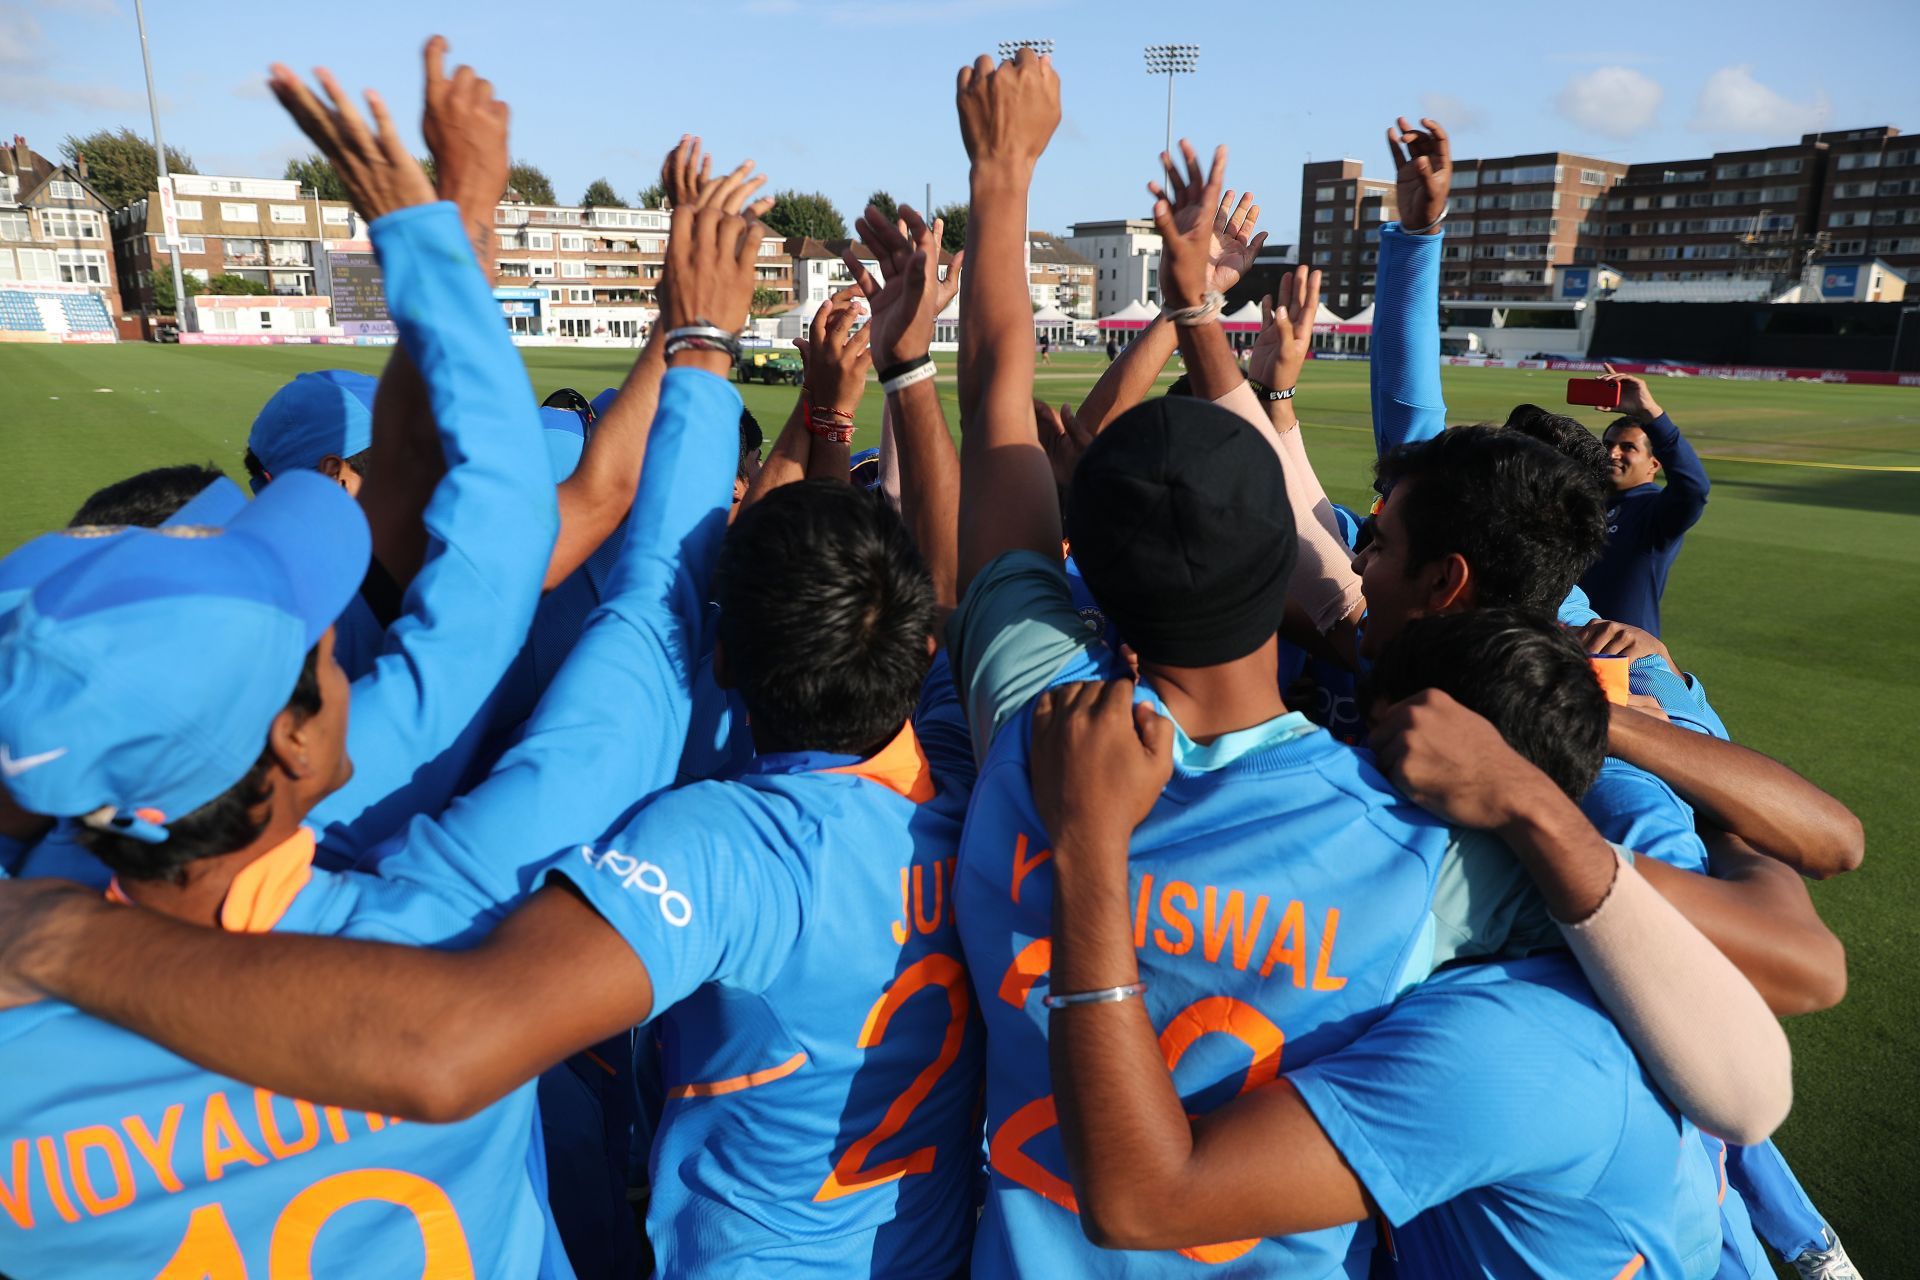 India U19 will be looking to make two wins on the trot.